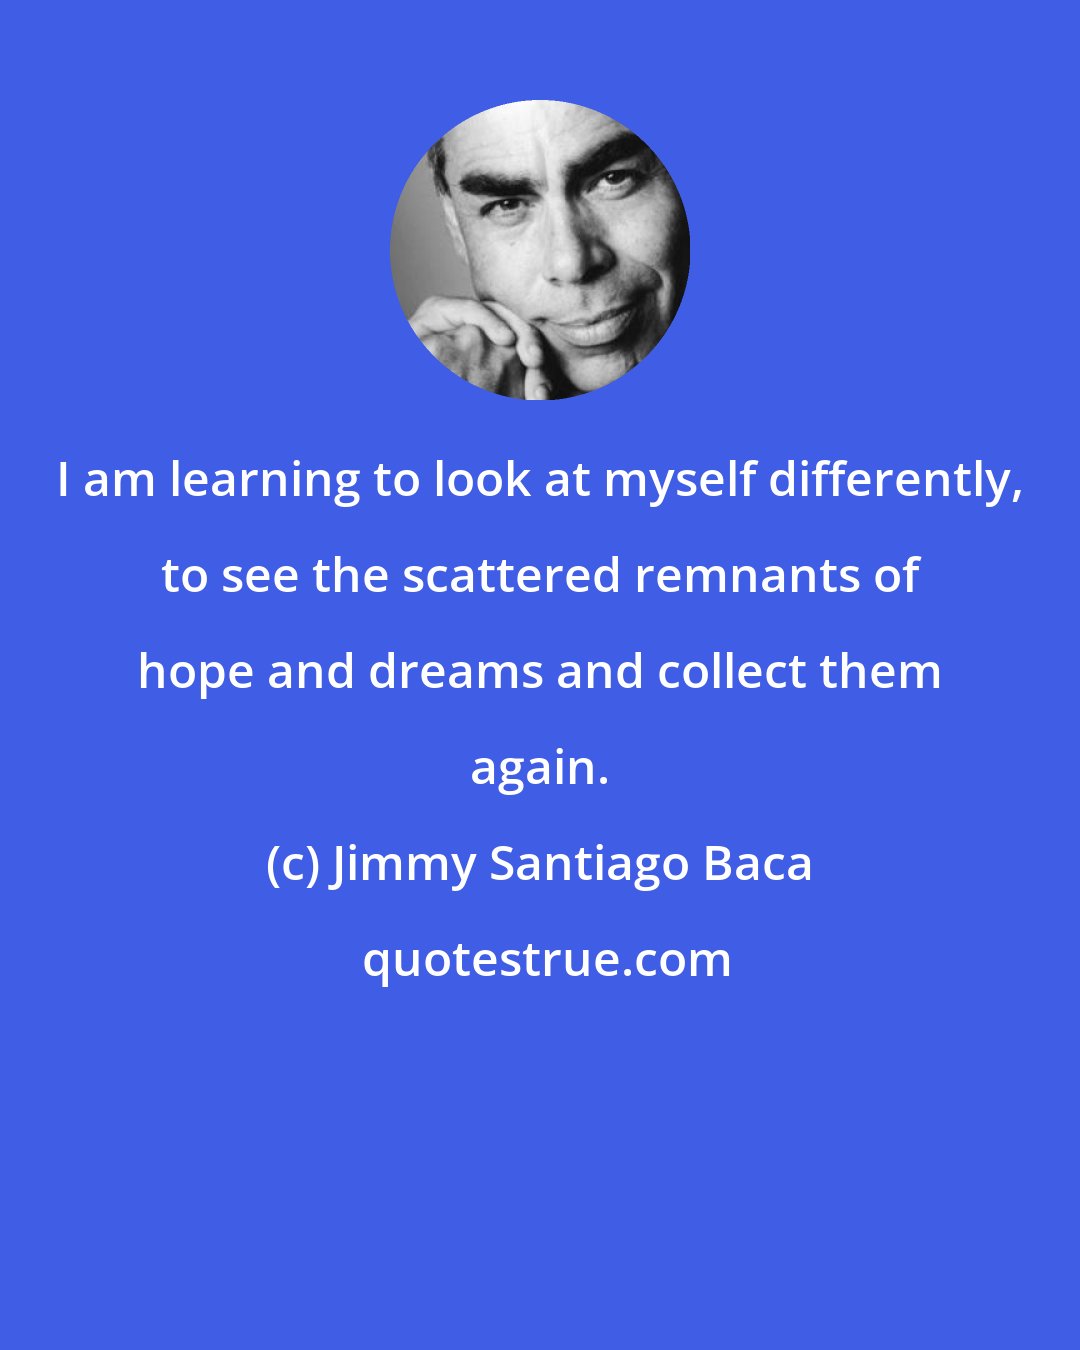 Jimmy Santiago Baca: I am learning to look at myself differently, to see the scattered remnants of hope and dreams and collect them again.